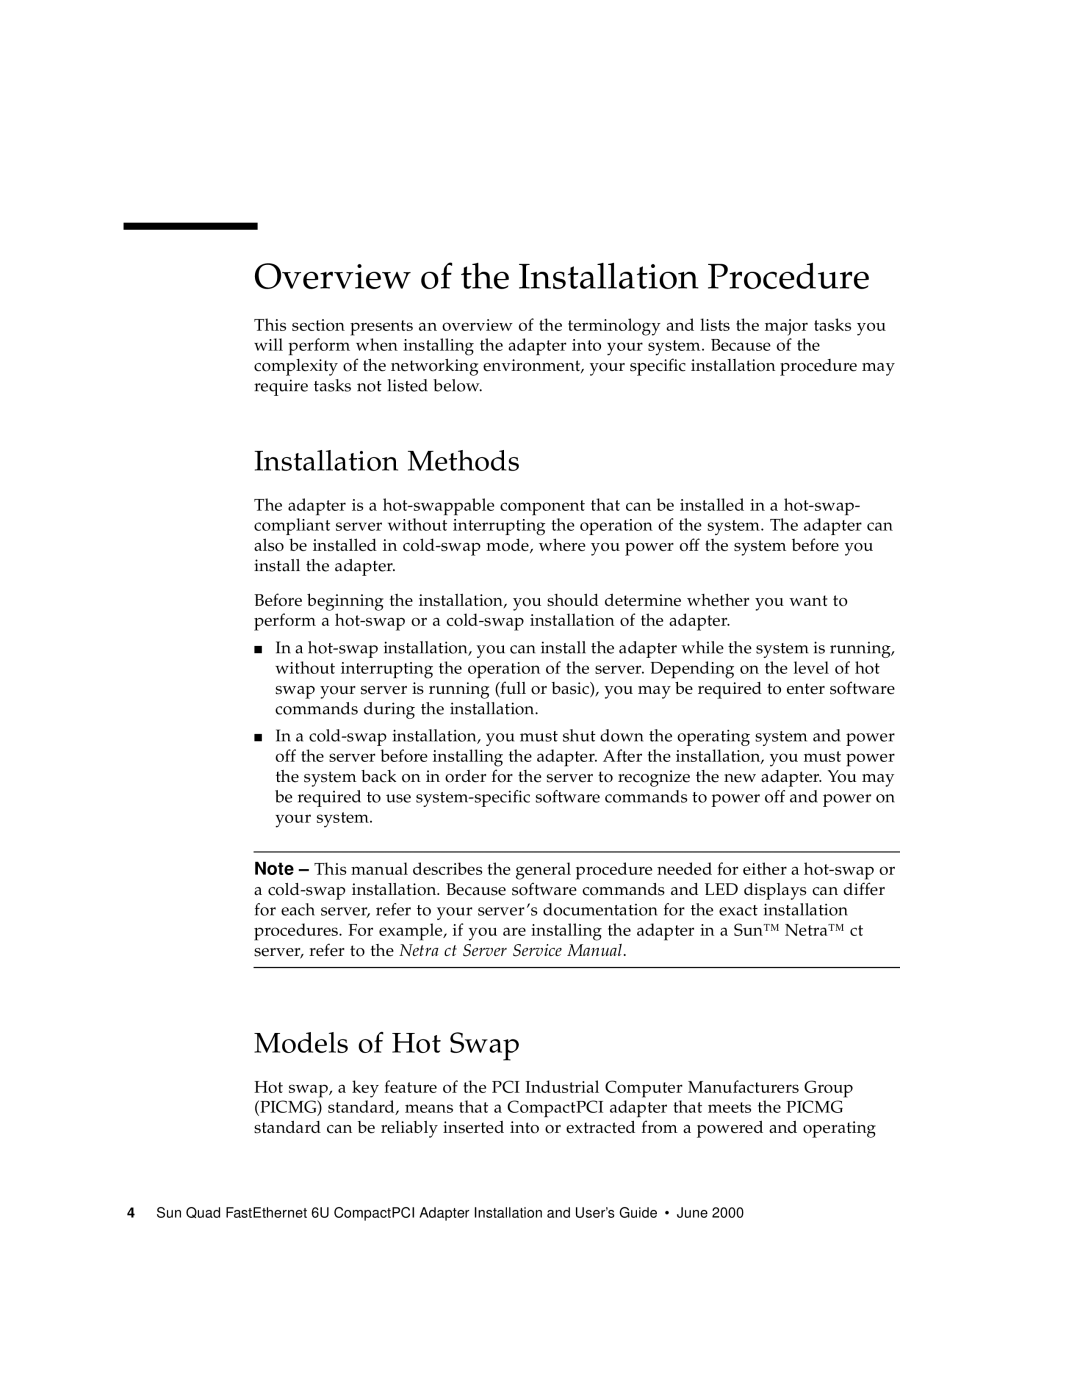 Sun Microsystems 6U manual Overview of the Installation Procedure, Installation Methods, Models of Hot Swap 